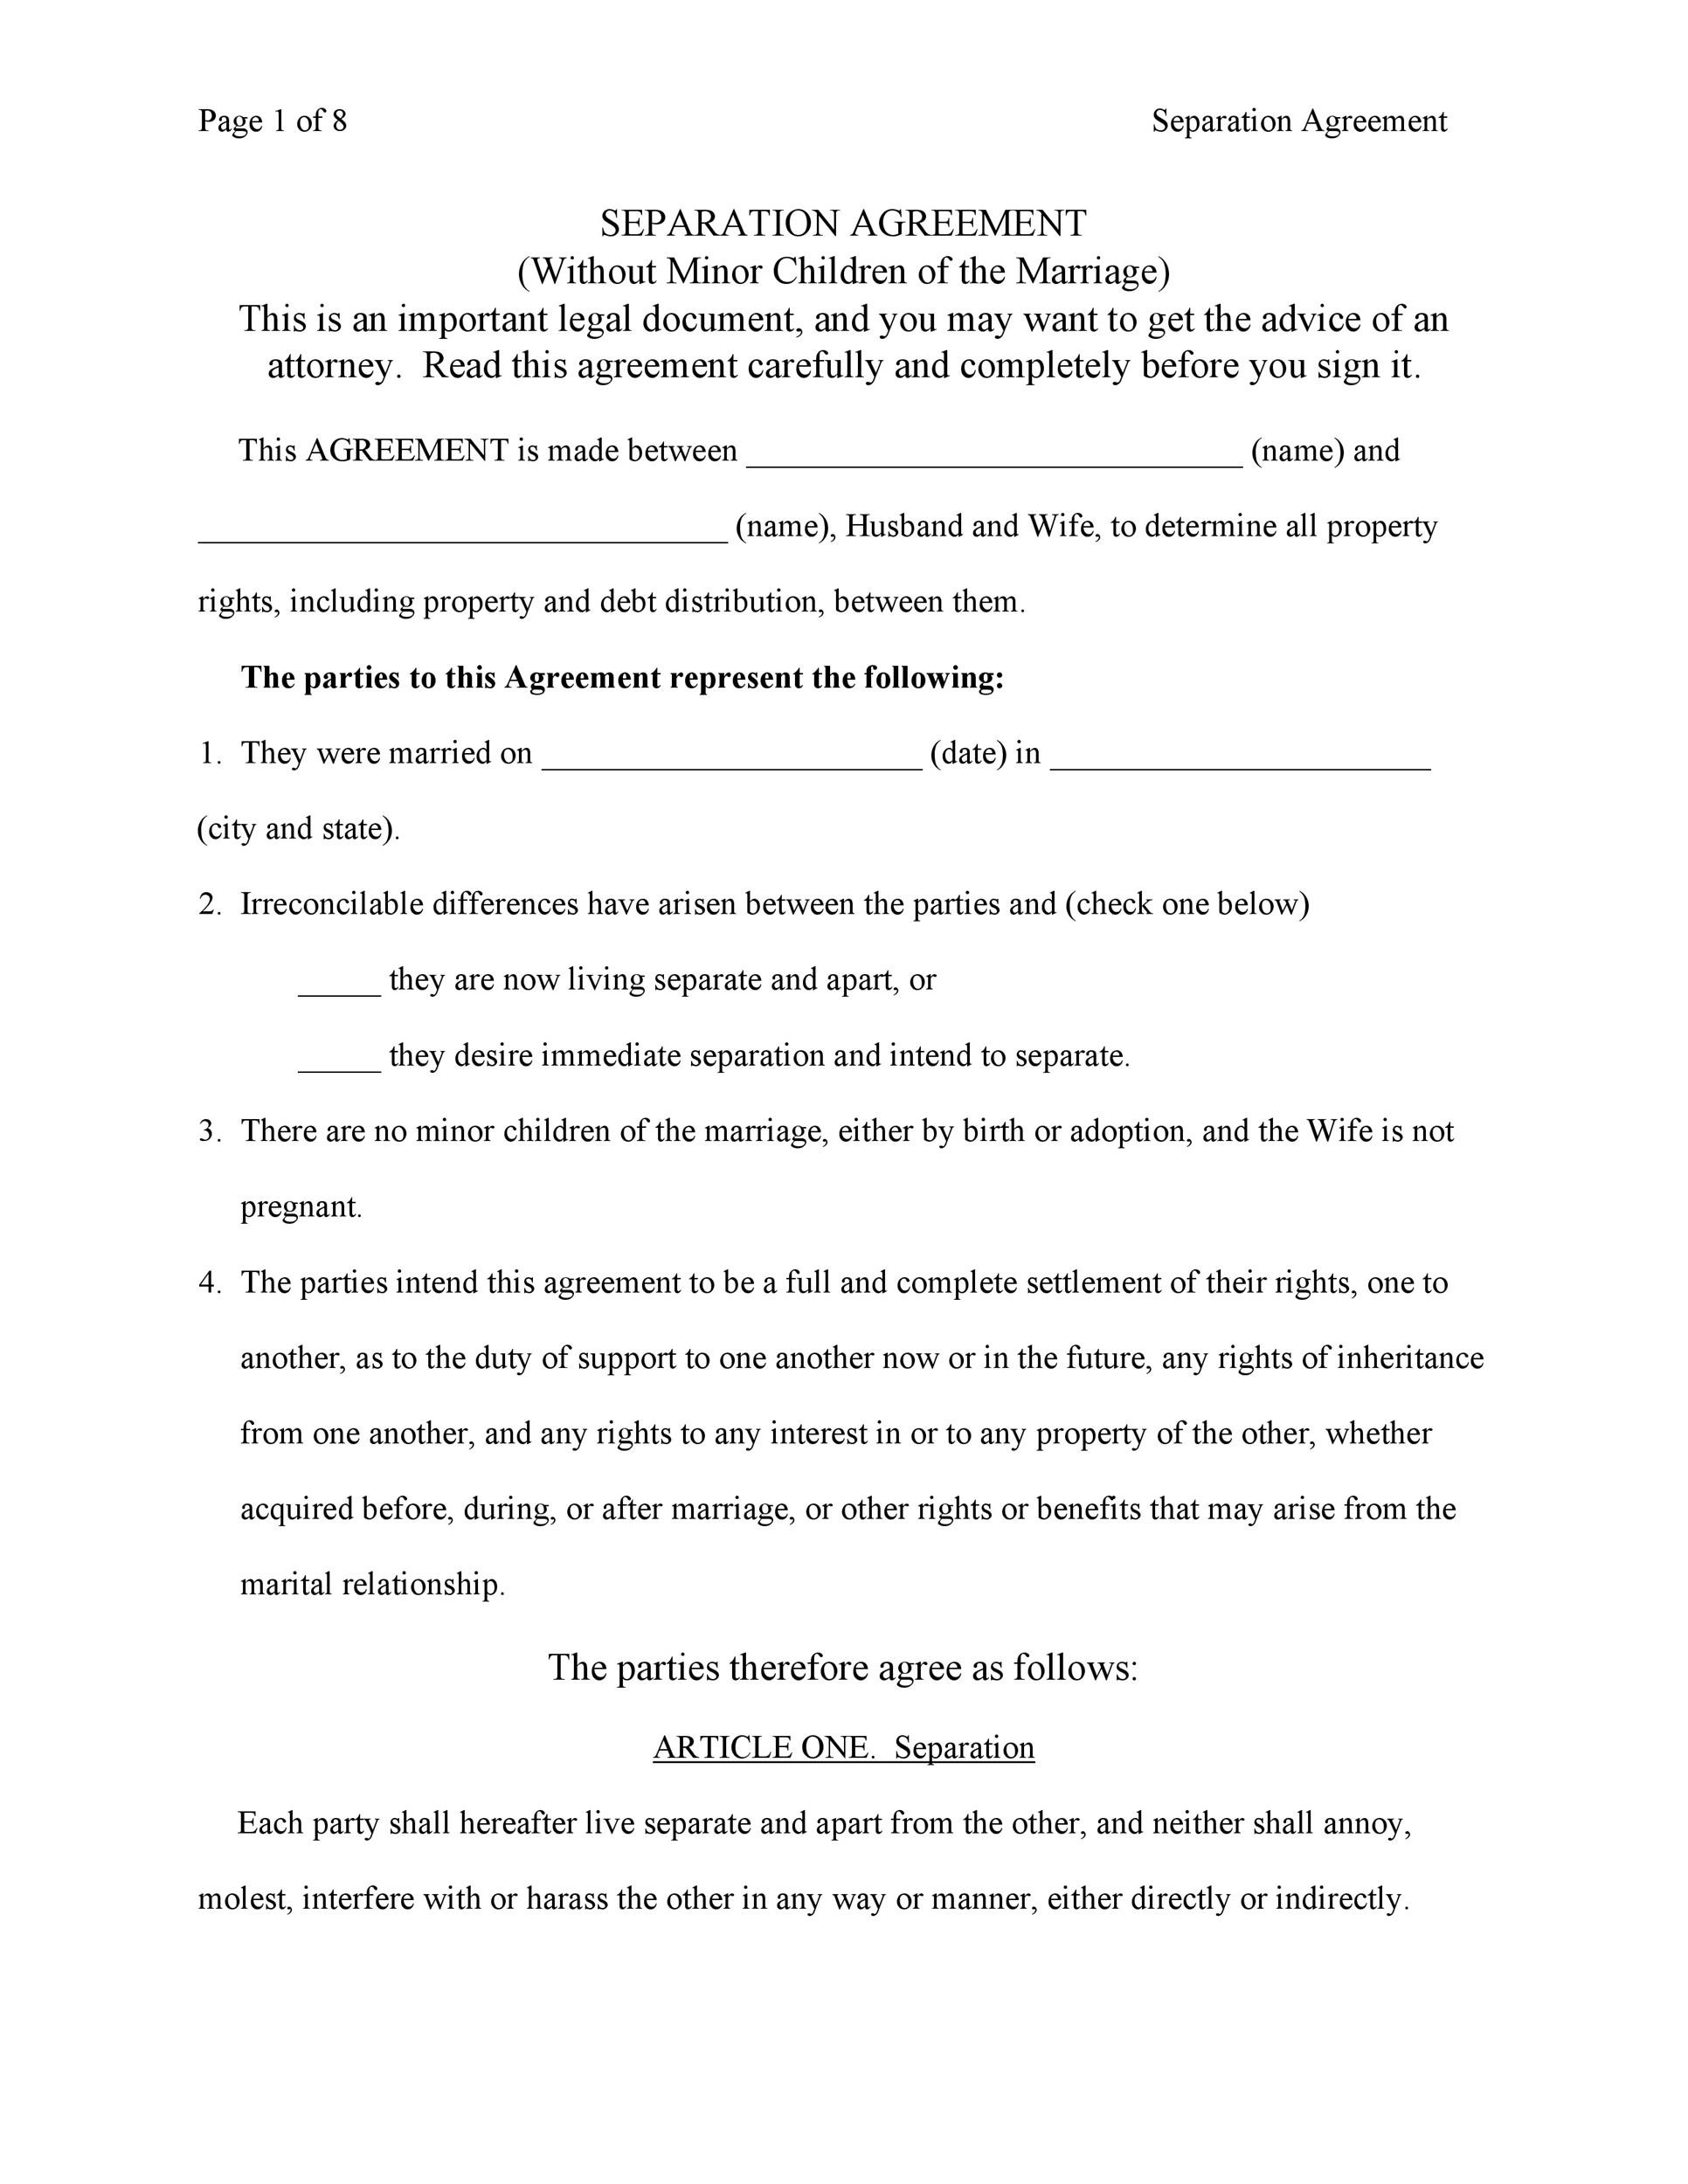 Free Separation Agreement Template 30